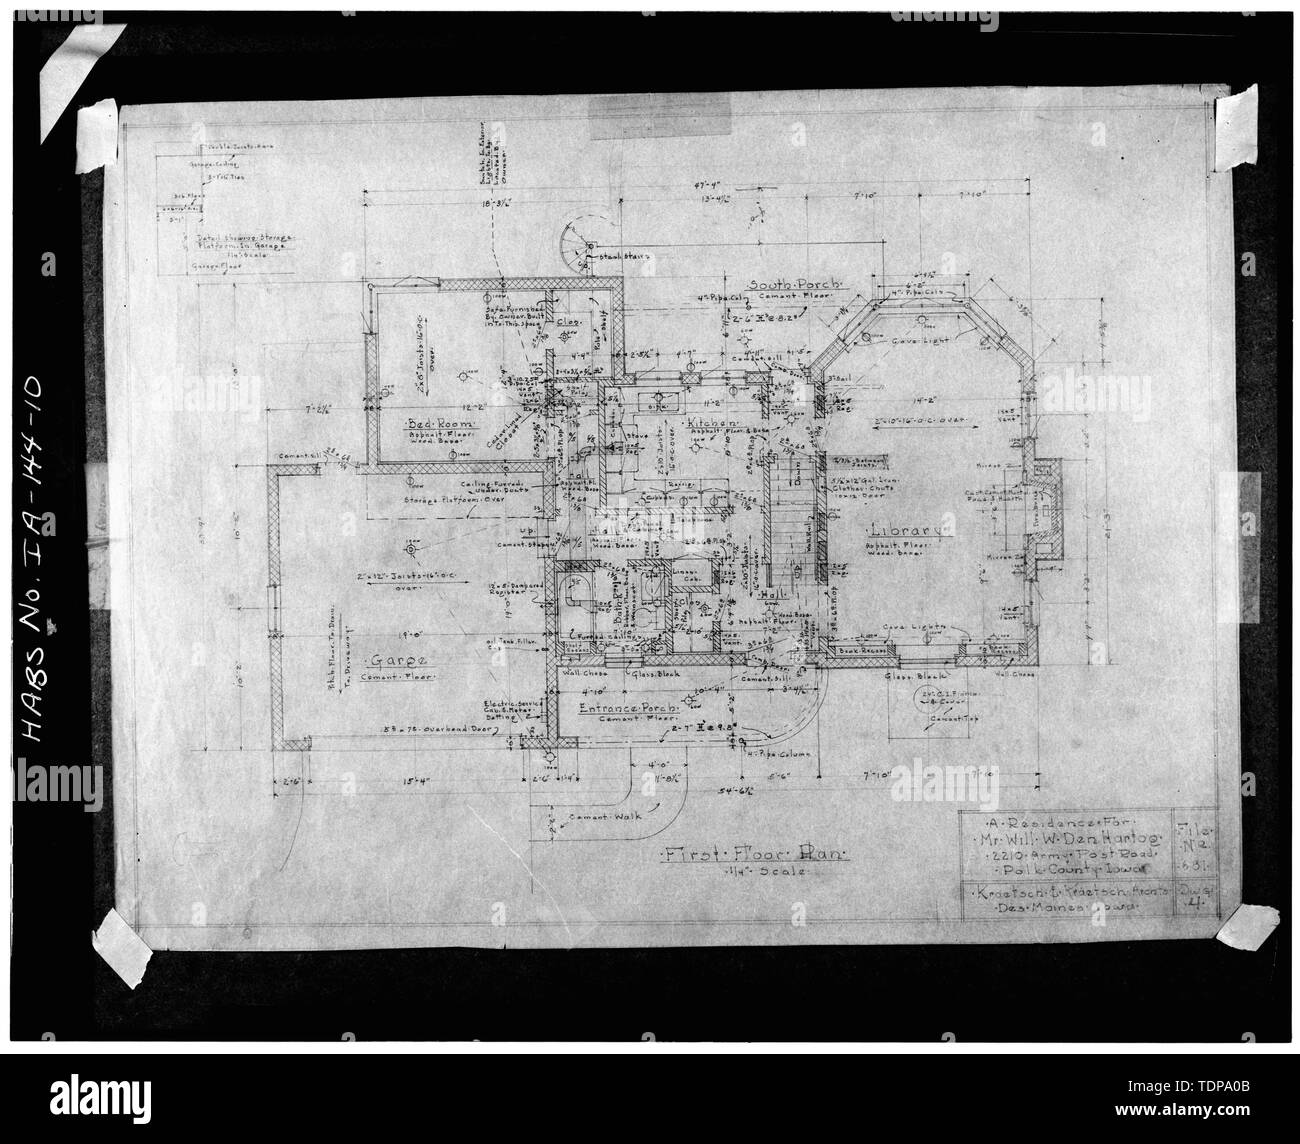 Photocopy Of Construction Drawings March 1940 View Of First